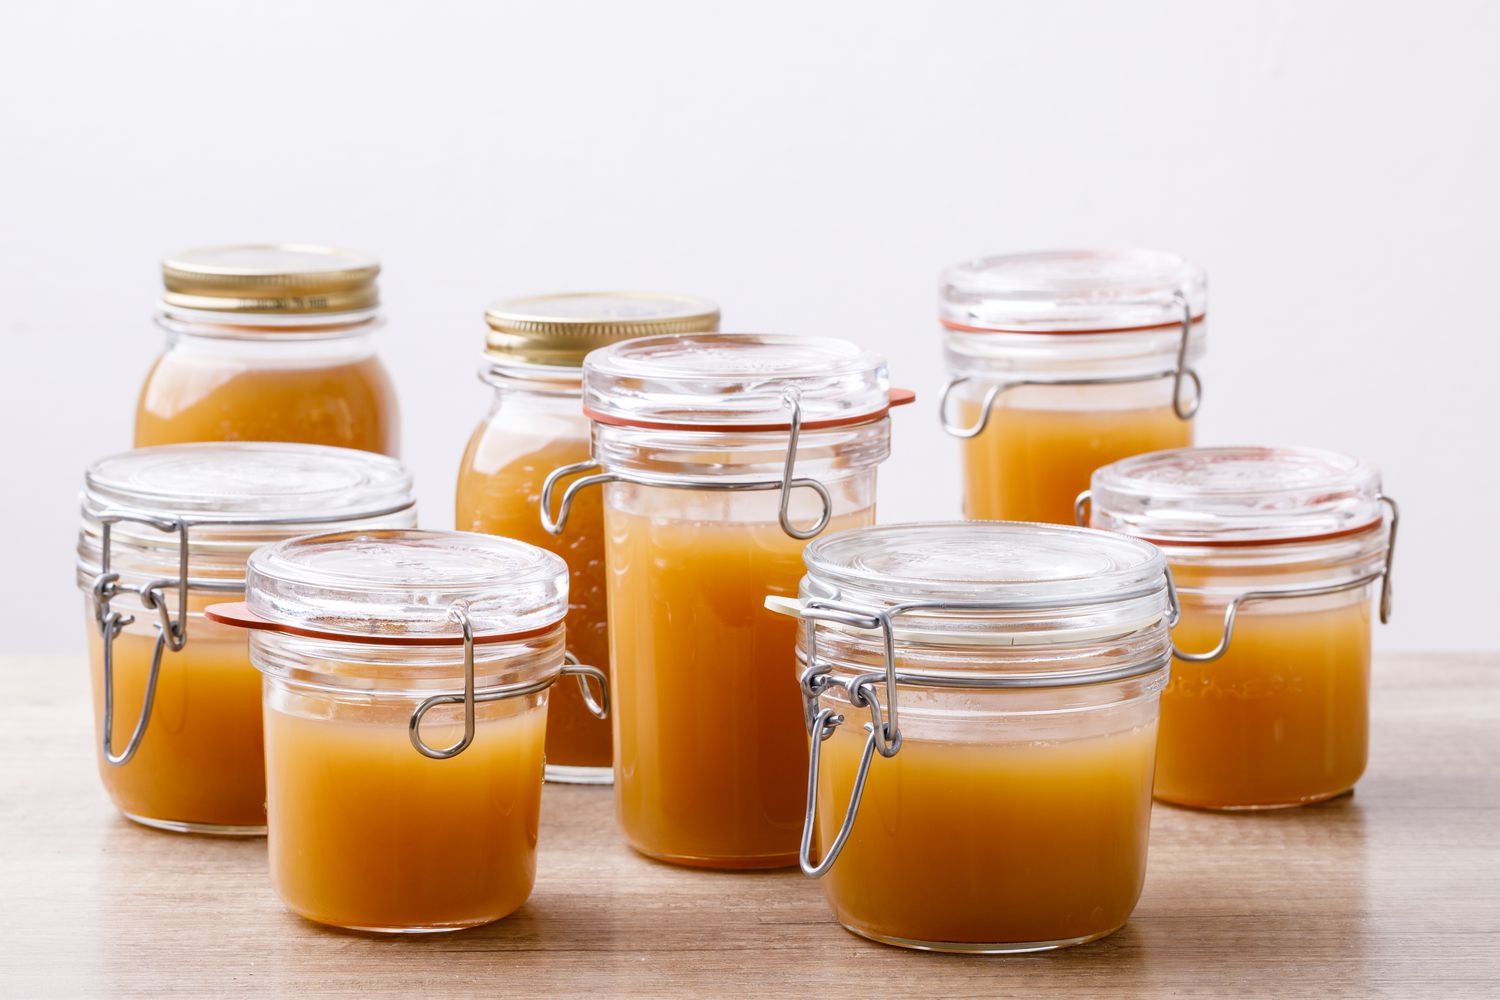 Overfilled my jars to freeze the bone broth I spent 48 hours